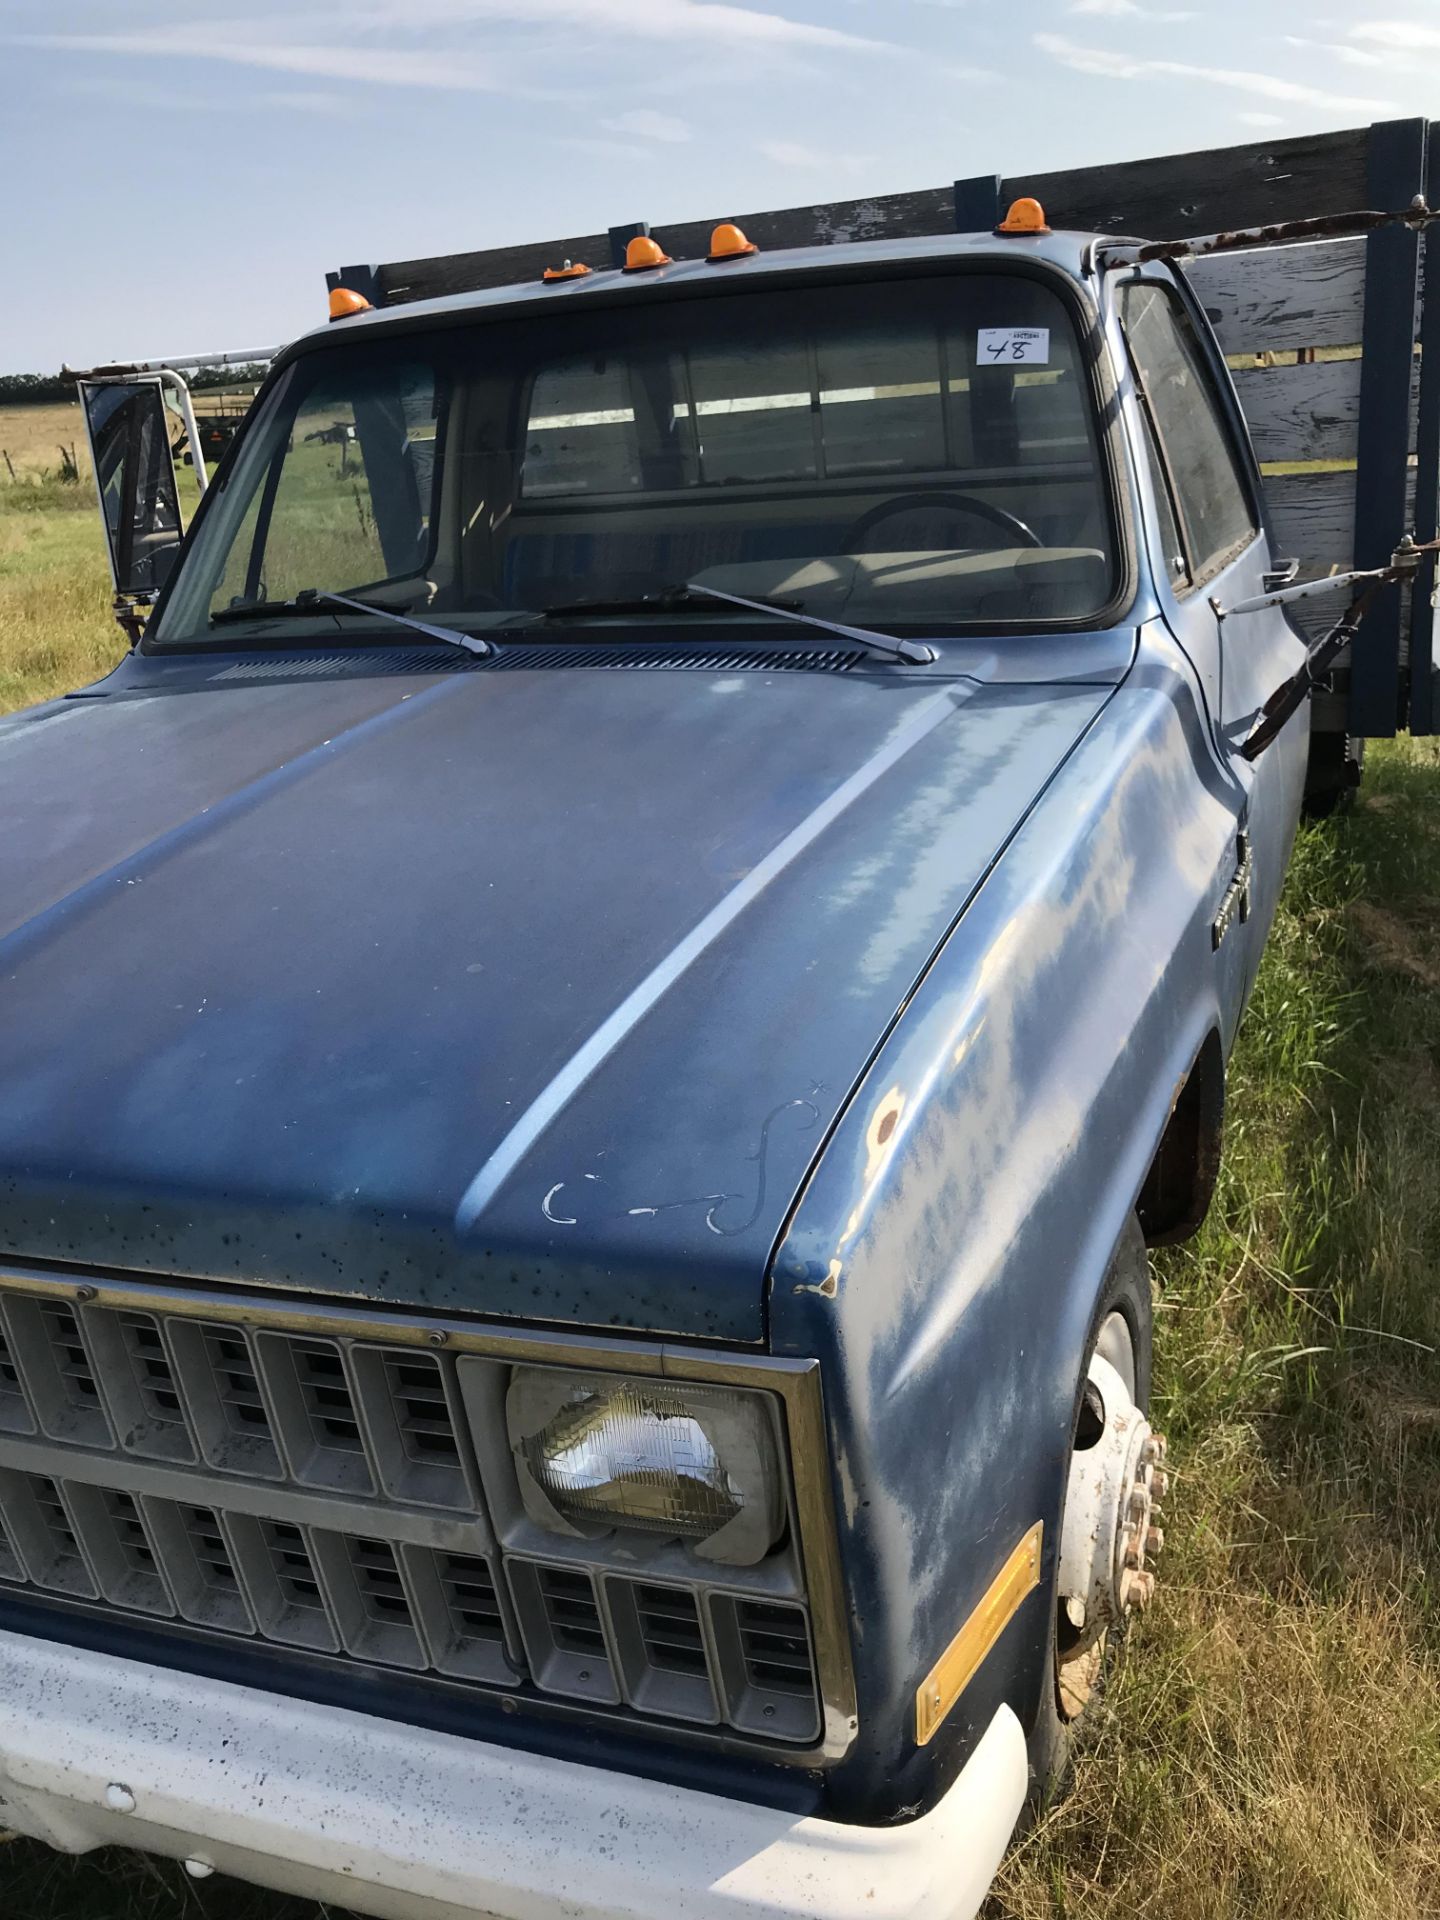 GMC Custom Deluxe 30, blue, 1 ton, 05176 km. NVSN parts only - Image 2 of 6